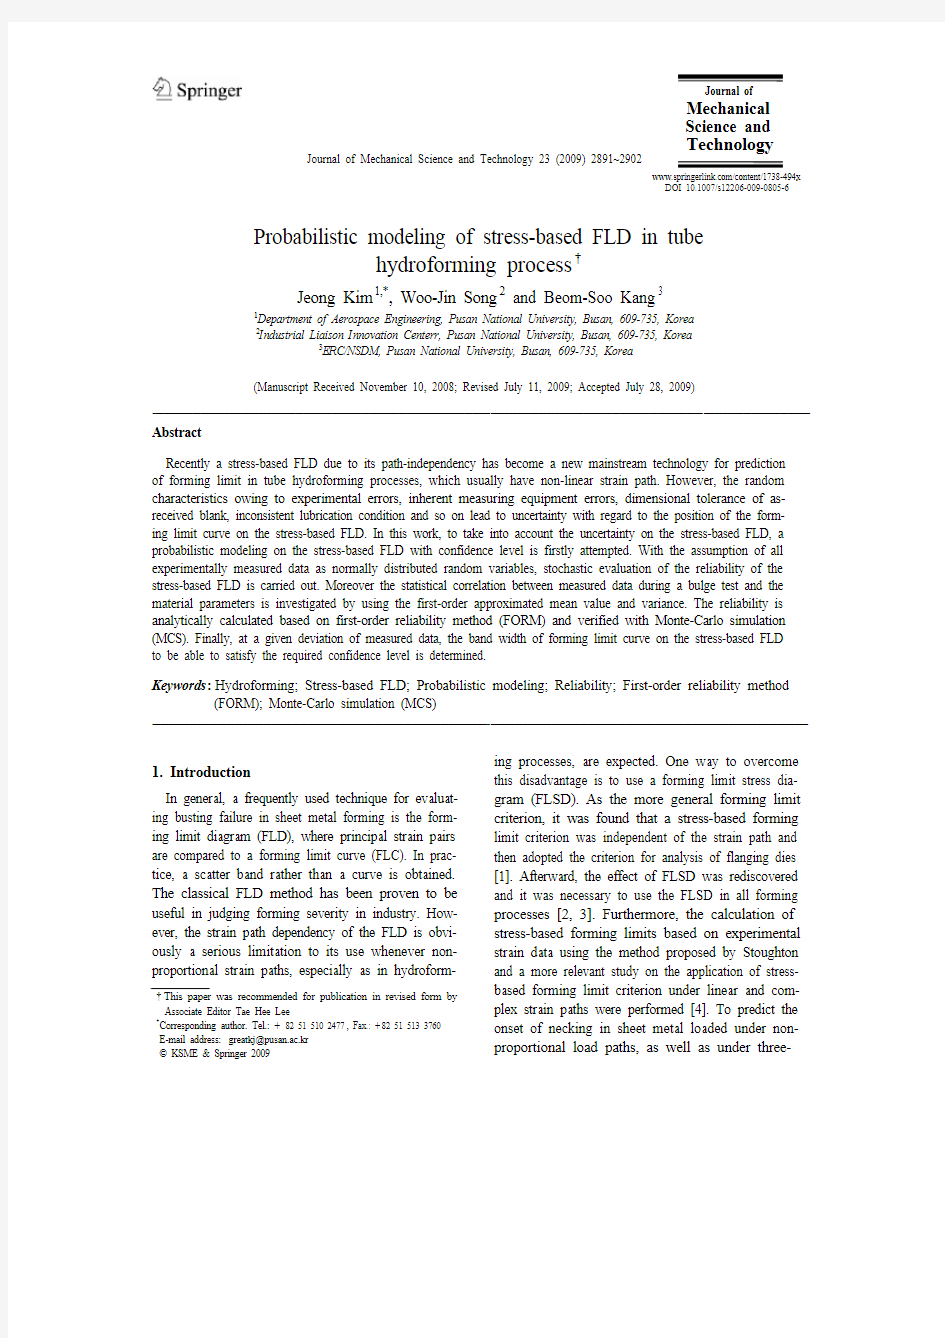 Probabilistic modeling of stress-based FLD in tube hydroforming process